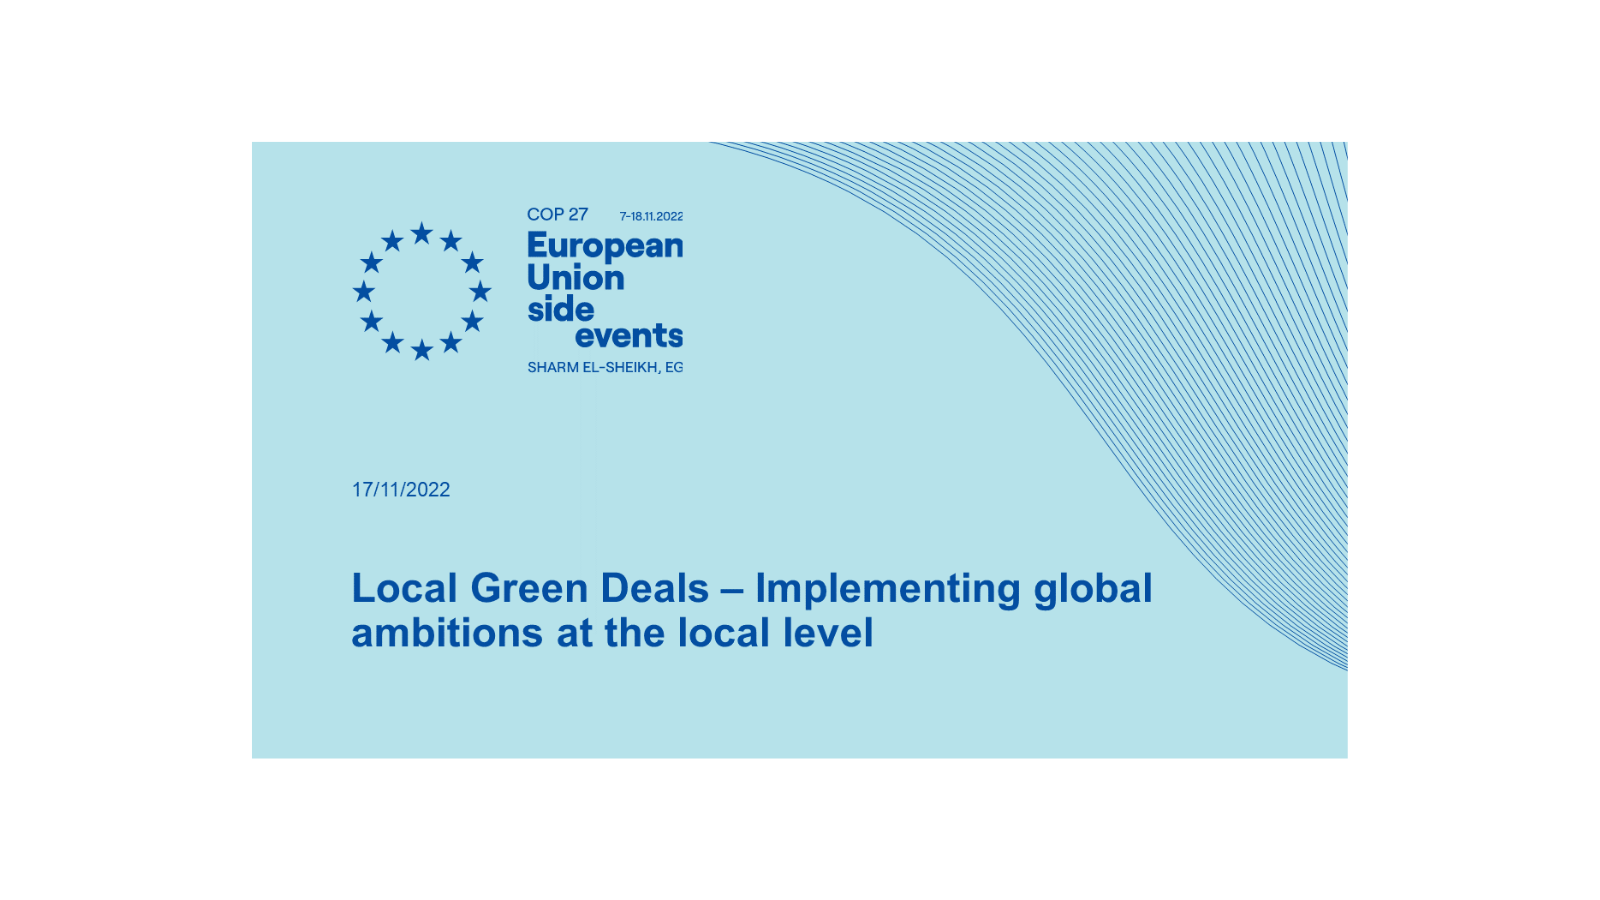 Local Green Deals – Implementing global ambitions at the local level